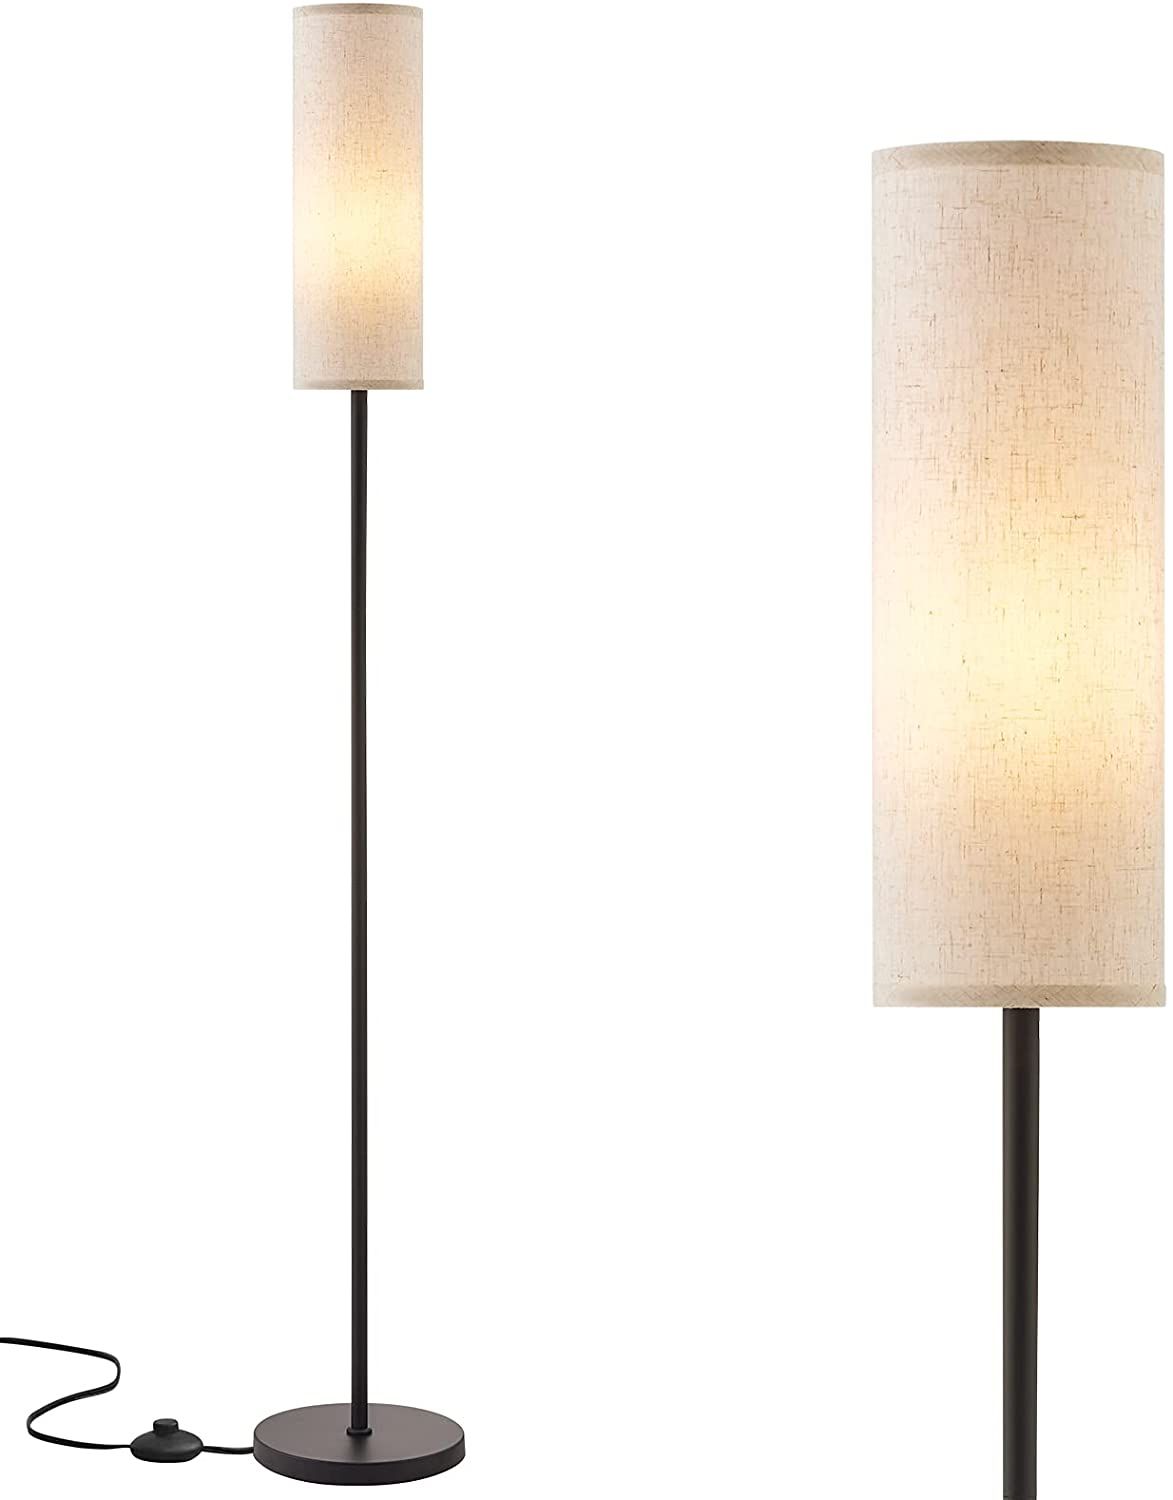 Floor Lamp For Living Room Modern – Pole Lamps For Bedrooms Tall,modern  Standing Lamps With Lampshade, 65'' Tall Lamp Fo – Walmart With Regard To Modern Floor Lamps (Photo 11 of 15)